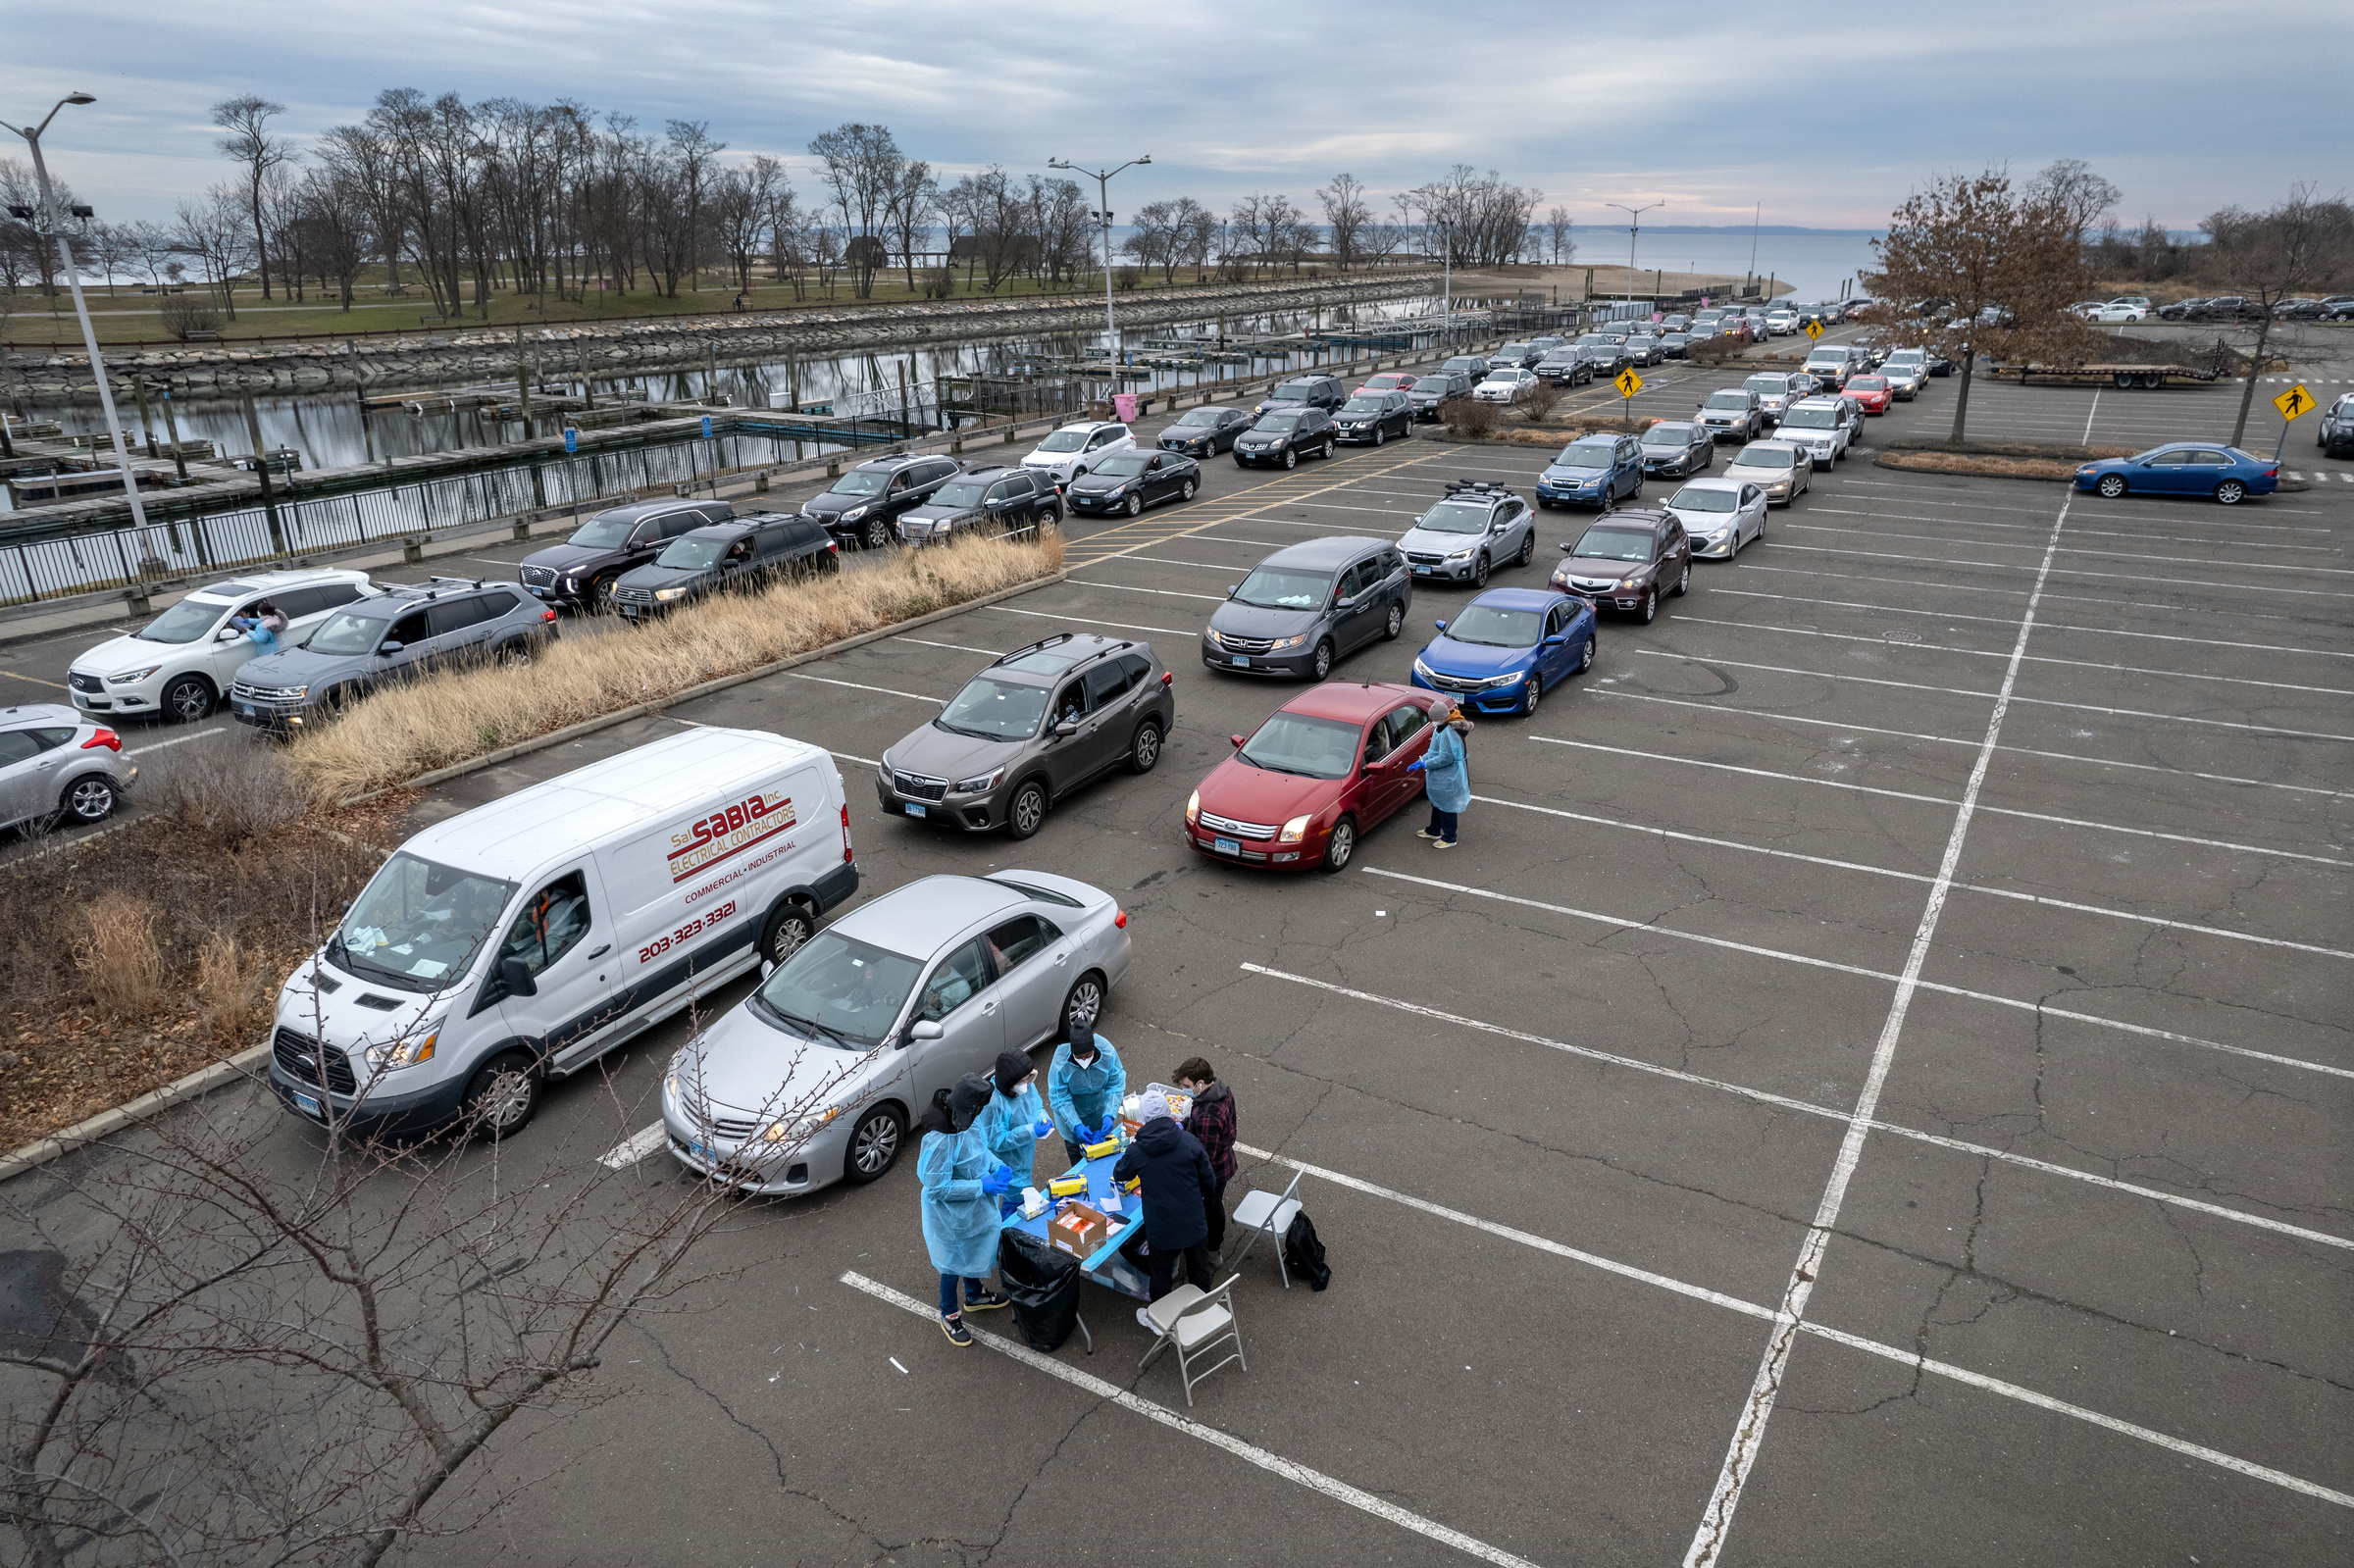 In an aerial view, health workers administer COVID-19 PCR tests at an outdoor testing site in Stamford, Conn., on Dec. 28, 2021. (John Moore—Getty Images)